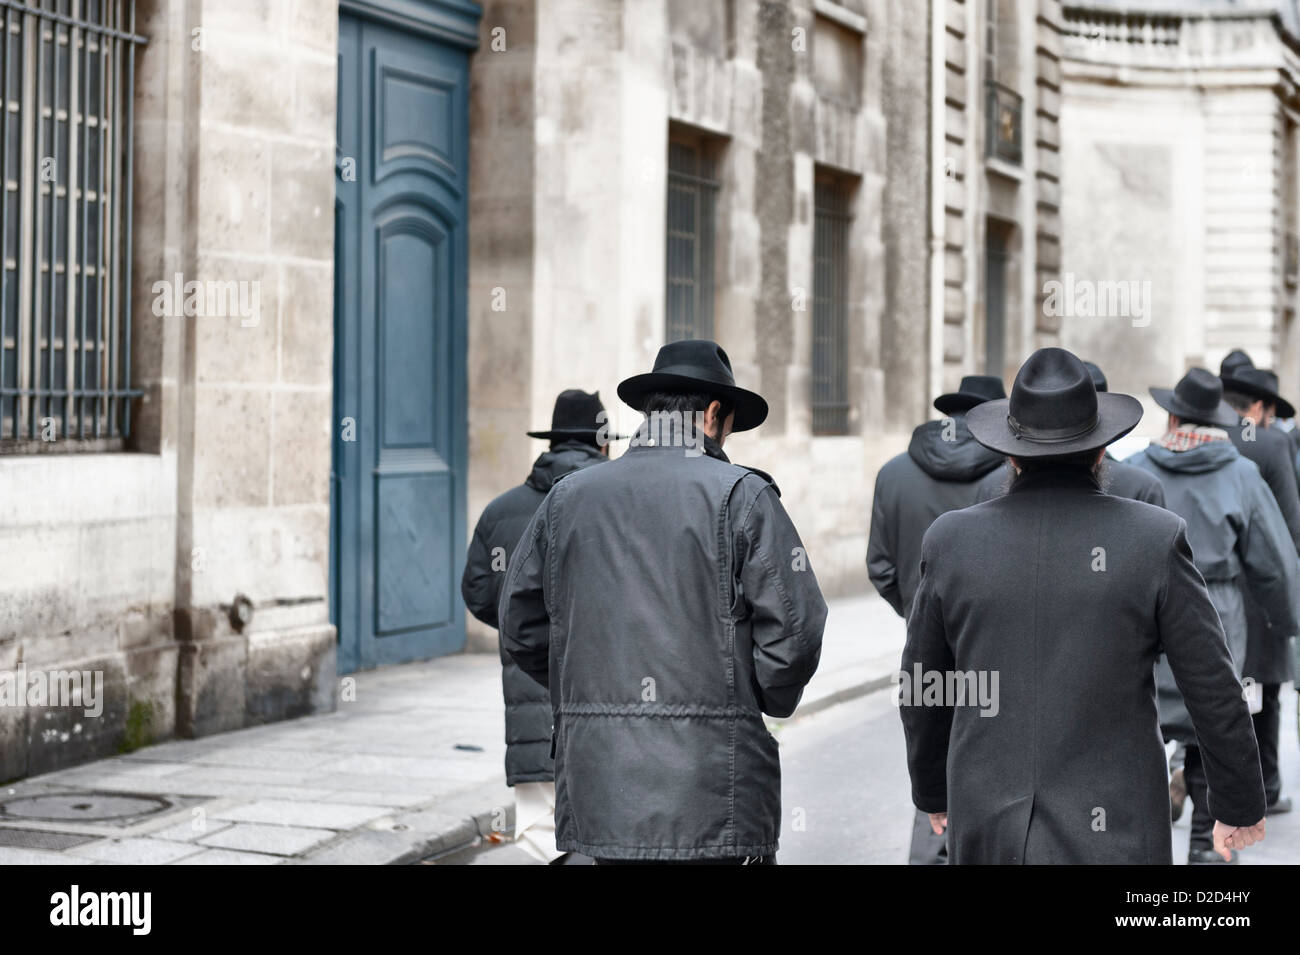 Jewish men in traditional wide-brimmed hats returning as a group from Synagogue on the Sabbath in Le Marais, Paris. Stock Photo